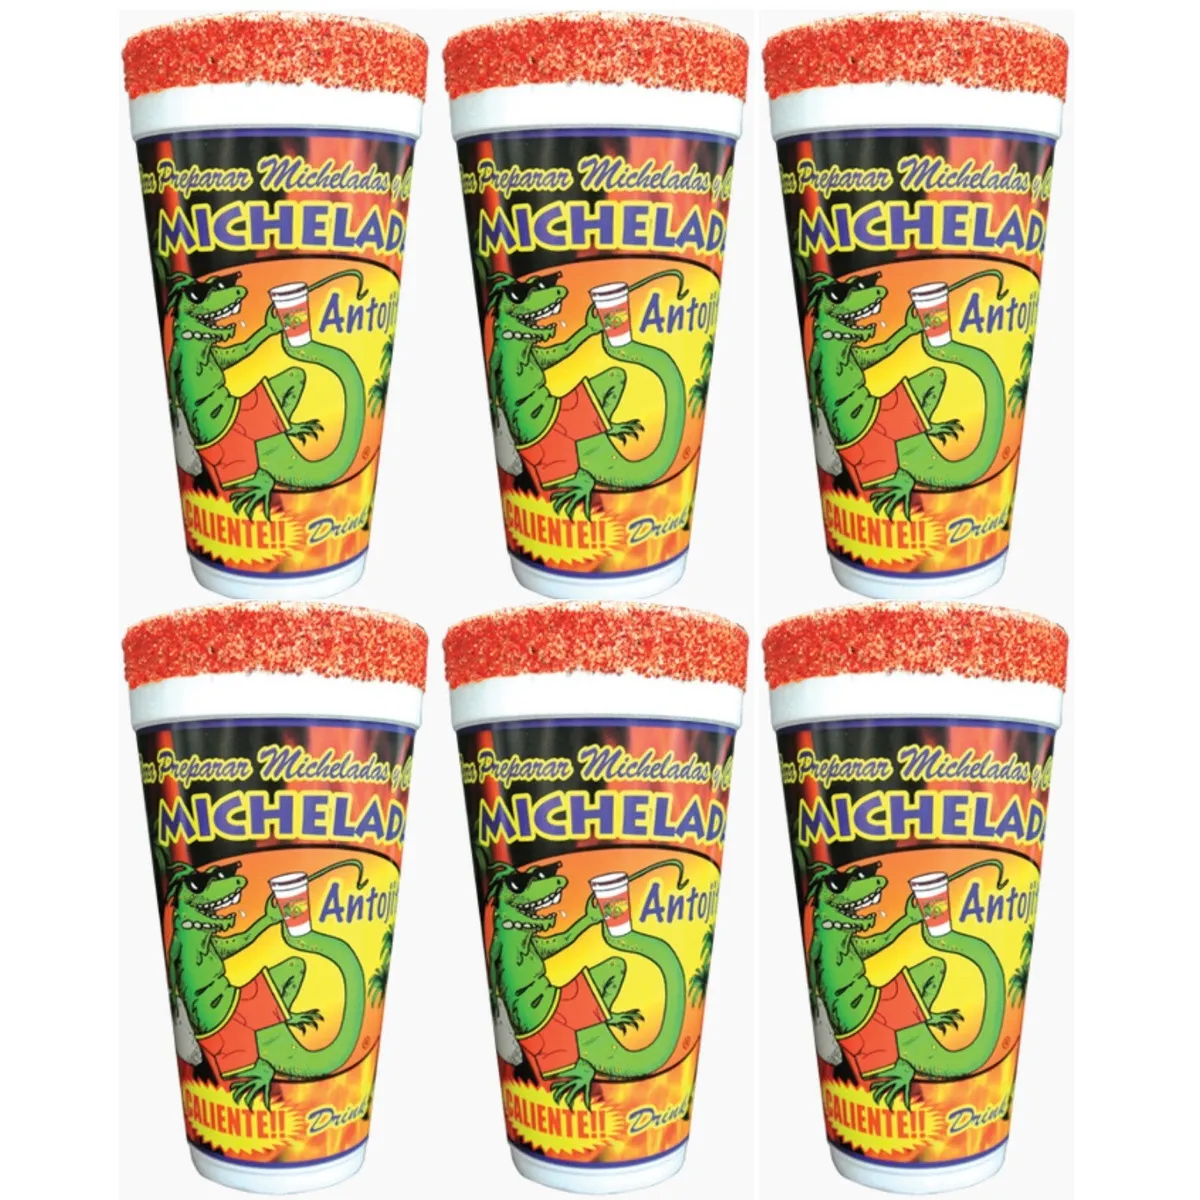 Antojitos Micheladas Mix Cup Ready to Use, 24 Oz (Pack of 6)